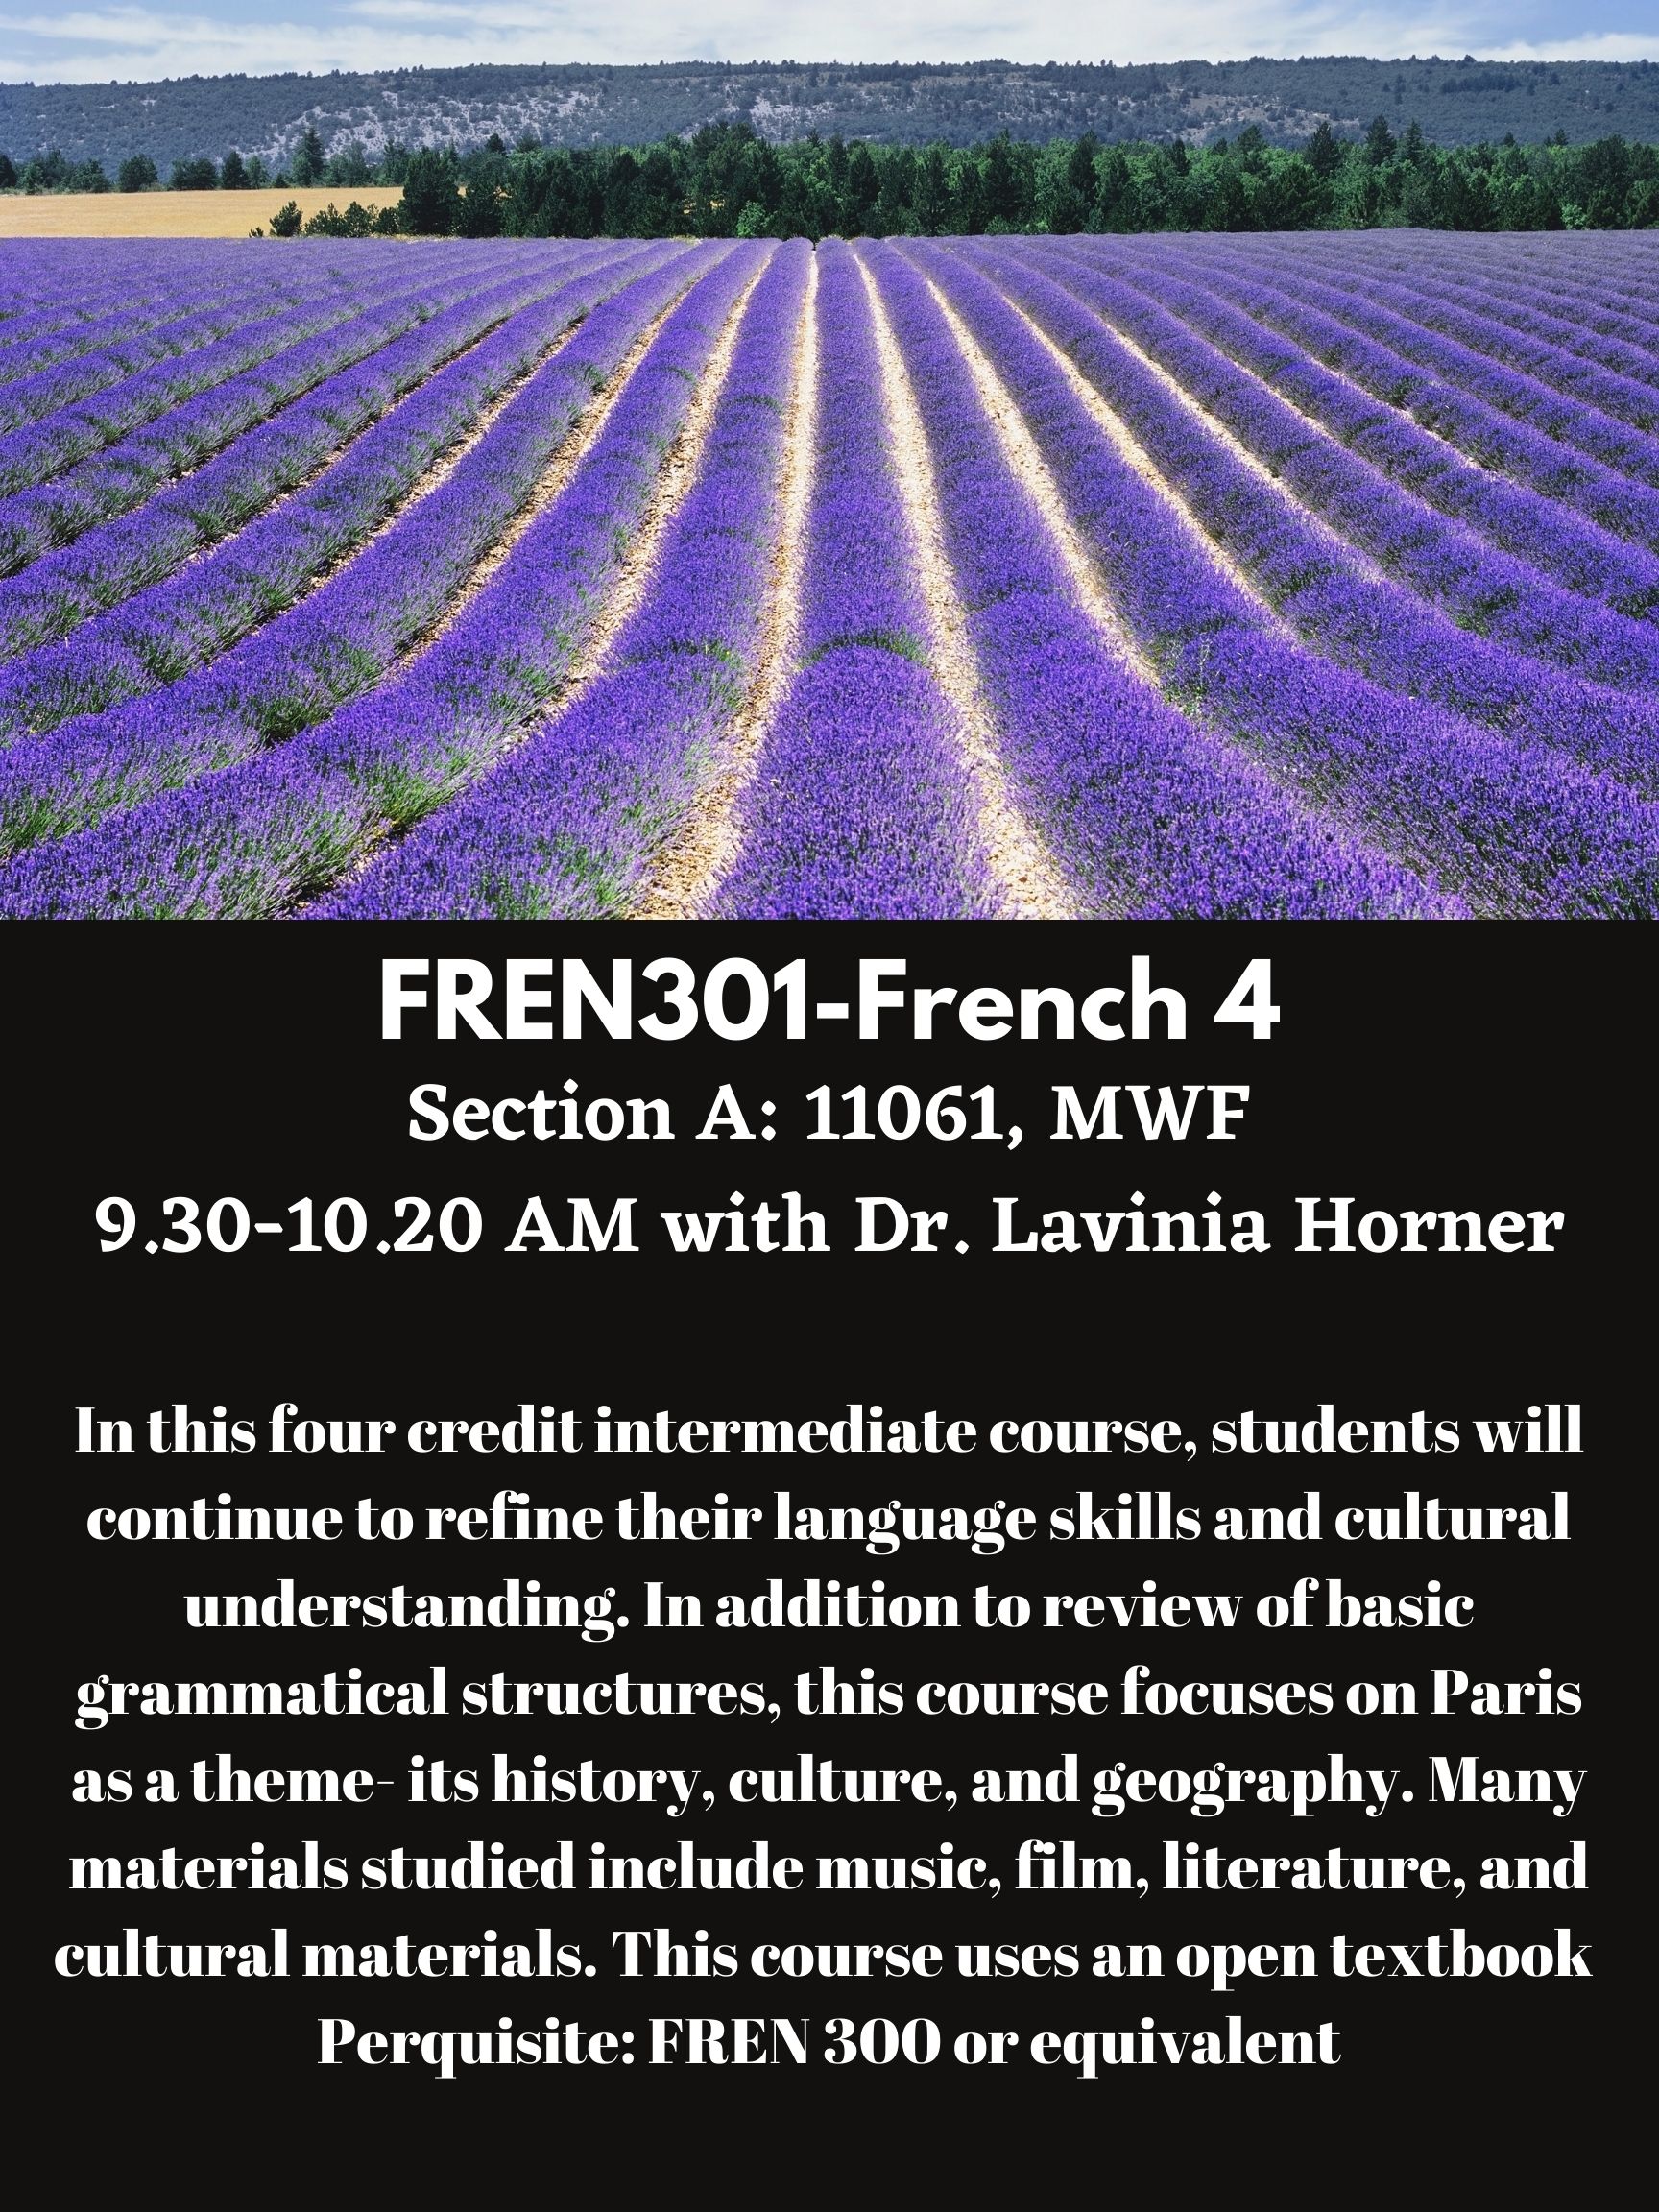 FREN301-French 4. Section A: 11061, MWF 9.30-10.20 AM with Dr. Lavinia Horner. In this four credit intermediate course, students will continue to refine their language skills and cultural understanding. In addition to review of basic grammatical structures, this course focuses on Paris as a theme- its history, culture, and geography. Many materials studied include music, film, literature, and cultural materials. This course uses an open textbook  Perquisite: FREN 300 or equivalent